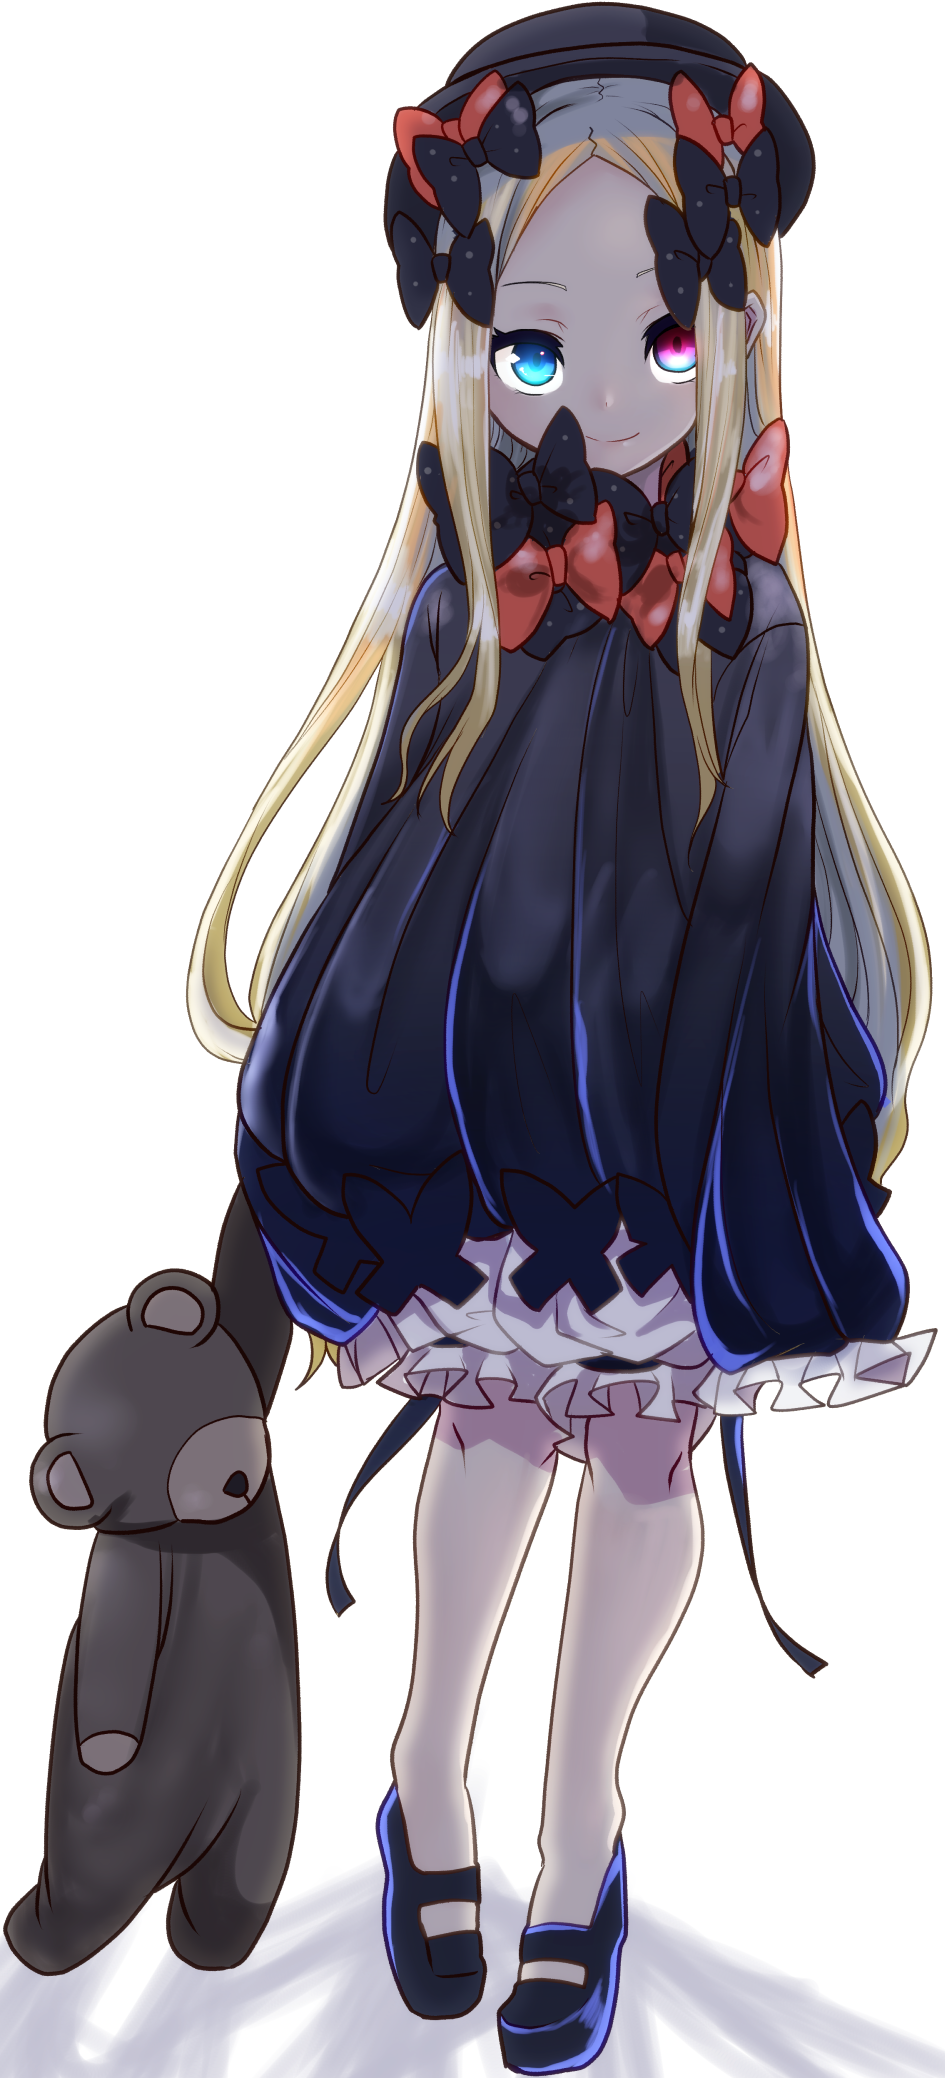 1girl abigail_williams_(fate/grand_order) bangs black_bow black_dress black_footwear black_headwear blonde_hair bloomers blue_eyes bow bug butterfly closed_mouth commentary_request dress fate/grand_order fate_(series) forehead full_body glowing glowing_eyes hair_bow hat heterochromia hiedanotsukai highres holding holding_stuffed_animal insect long_hair long_sleeves looking_at_viewer no_socks orange_bow parted_bangs polka_dot polka_dot_bow shoes sleeves_past_fingers sleeves_past_wrists smile solo standing standing_on_one_leg stuffed_animal stuffed_toy teddy_bear underwear very_long_hair violet_eyes white_background white_bloomers